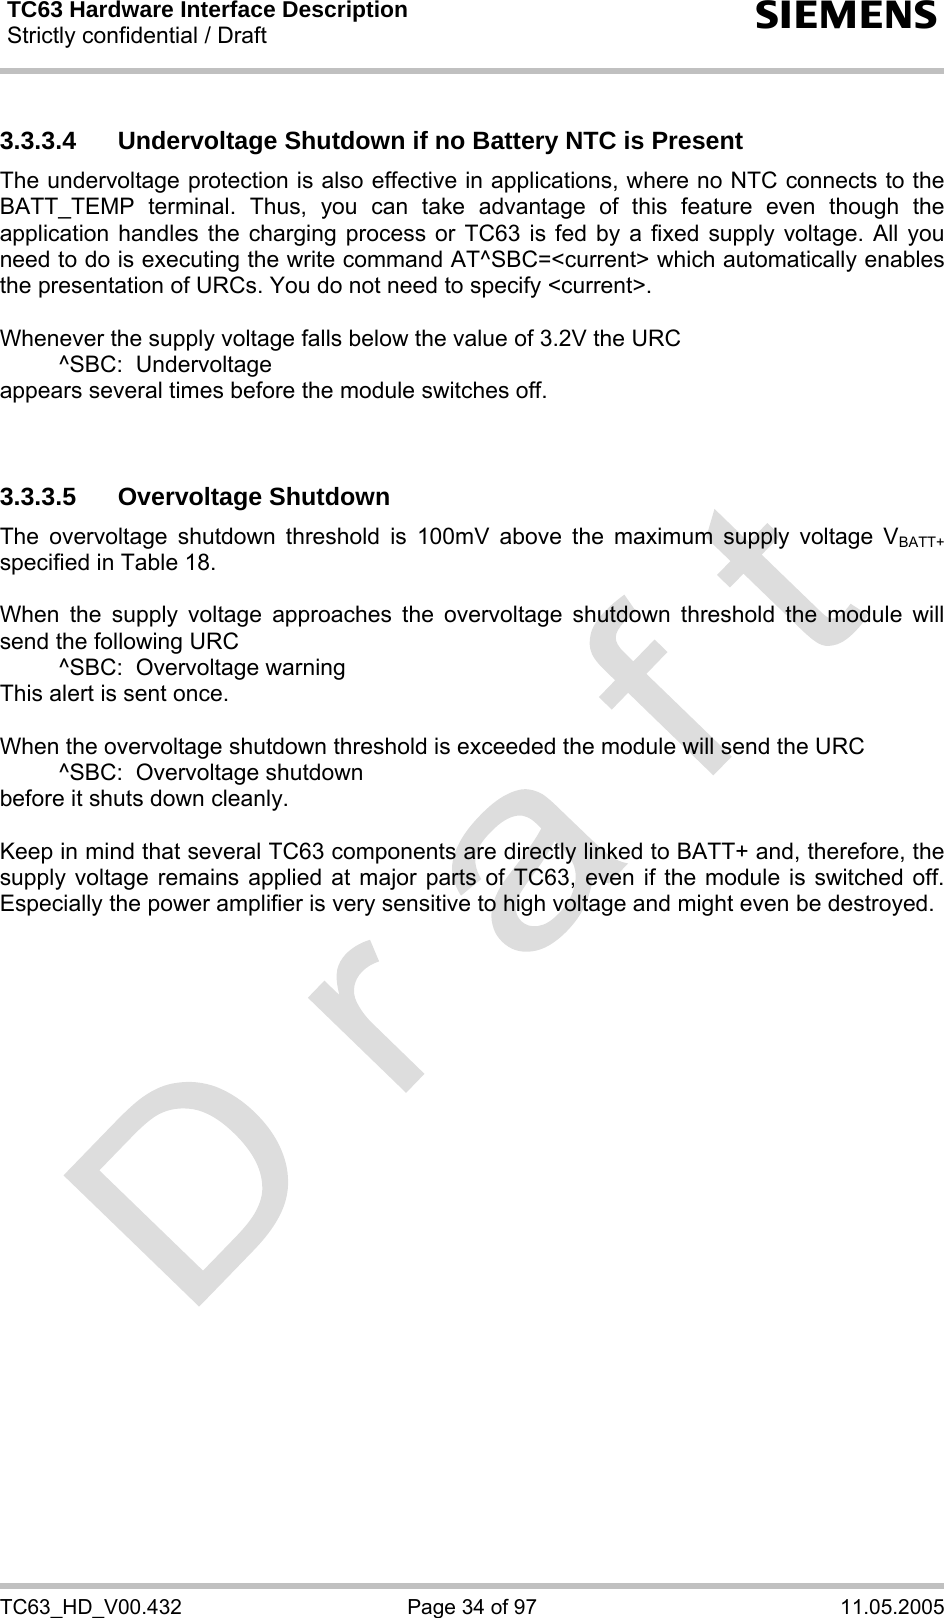 TC63 Hardware Interface Description Strictly confidential / Draft  s TC63_HD_V00.432  Page 34 of 97  11.05.2005 3.3.3.4  Undervoltage Shutdown if no Battery NTC is Present The undervoltage protection is also effective in applications, where no NTC connects to the BATT_TEMP terminal. Thus, you can take advantage of this feature even though the application handles the charging process or TC63 is fed by a fixed supply voltage. All you need to do is executing the write command AT^SBC=&lt;current&gt; which automatically enables the presentation of URCs. You do not need to specify &lt;current&gt;.   Whenever the supply voltage falls below the value of 3.2V the URC    ^SBC:  Undervoltage appears several times before the module switches off.   3.3.3.5 Overvoltage Shutdown The overvoltage shutdown threshold is 100mV above the maximum supply voltage VBATT+ specified in Table 18.   When the supply voltage approaches the overvoltage shutdown threshold the module will send the following URC    ^SBC:  Overvoltage warning This alert is sent once.  When the overvoltage shutdown threshold is exceeded the module will send the URC   ^SBC:  Overvoltage shutdown before it shuts down cleanly.  Keep in mind that several TC63 components are directly linked to BATT+ and, therefore, the supply voltage remains applied at major parts of TC63, even if the module is switched off. Especially the power amplifier is very sensitive to high voltage and might even be destroyed.      